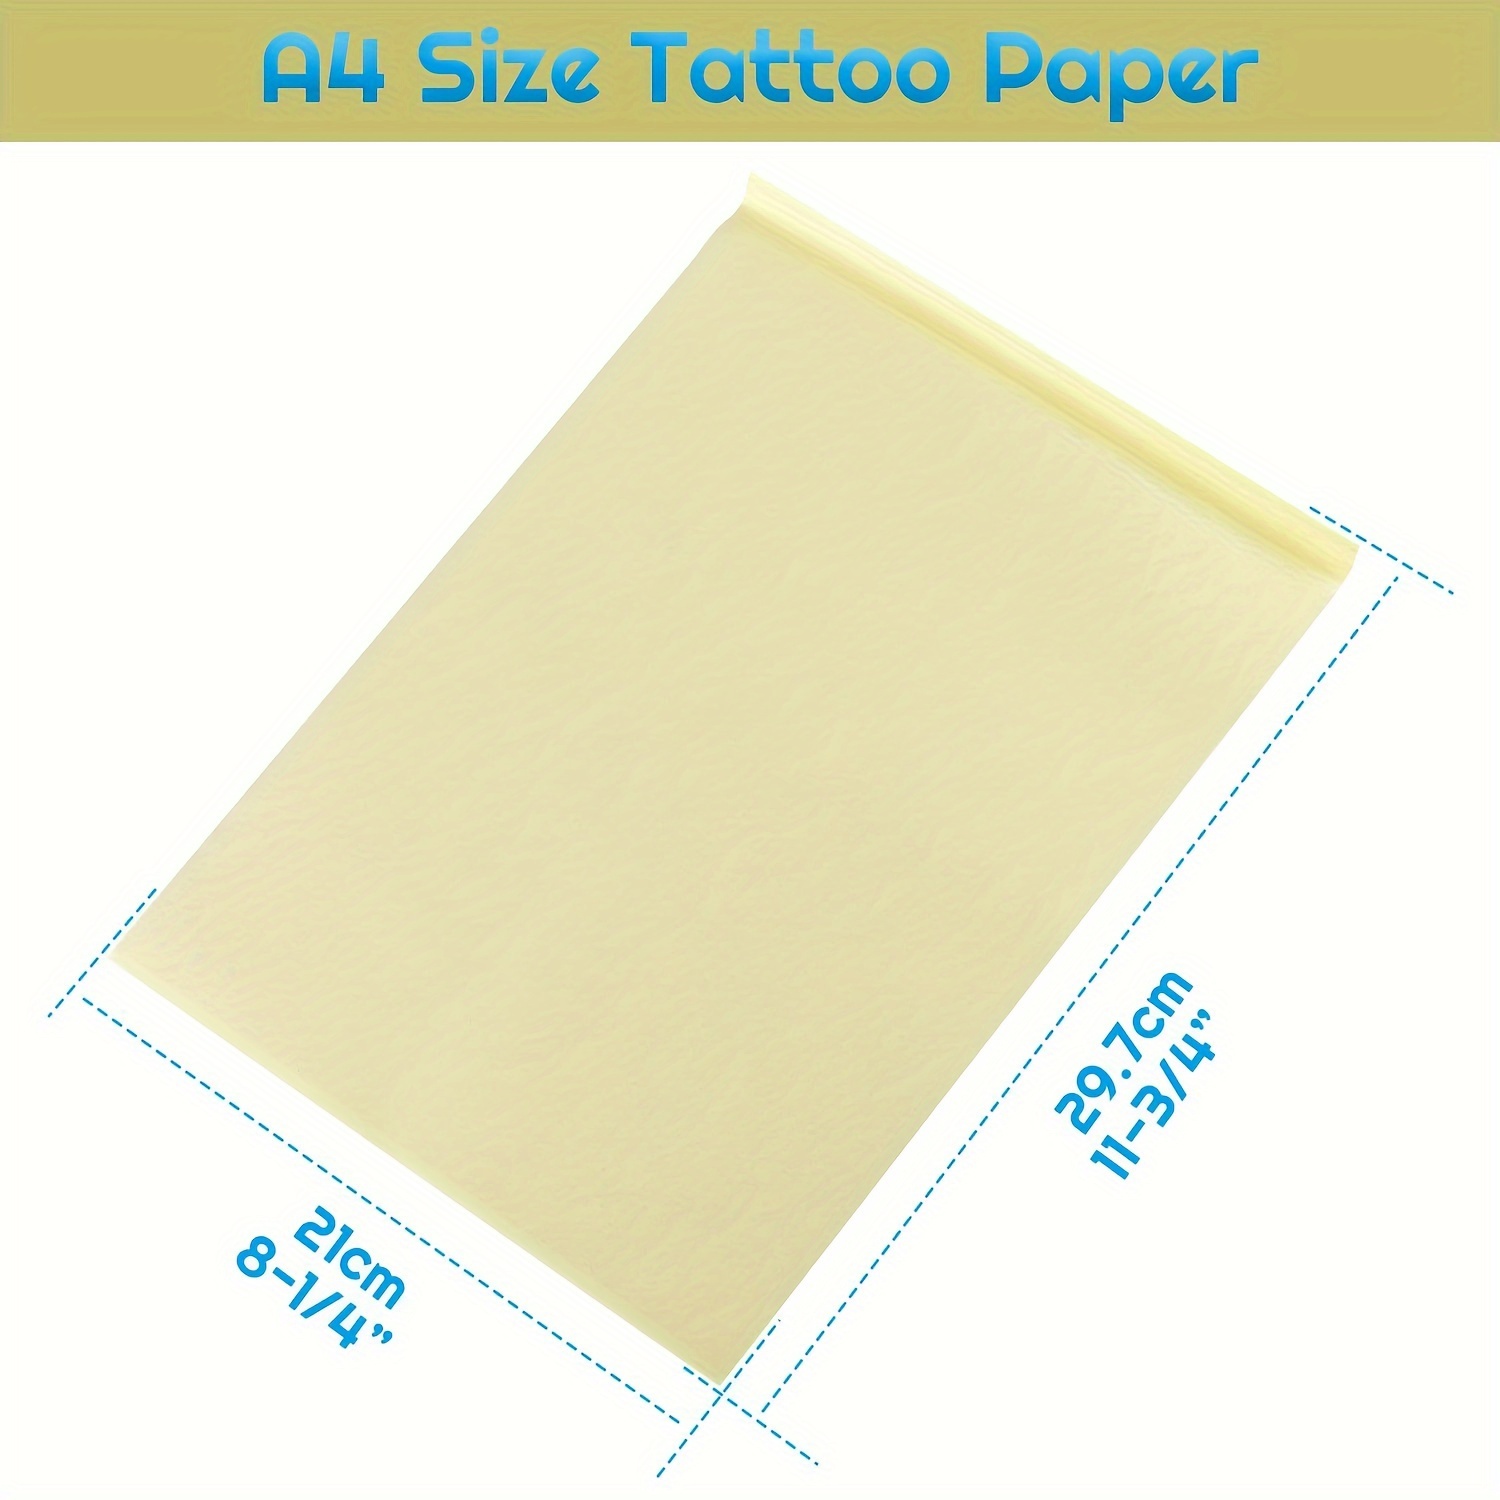 Tattoo Transfer Paper, Tattoo Stencil Transfer Paper For Tattooing, Thermal  Stencil Carbon Copier Paper Compatible With Tattoo Supply